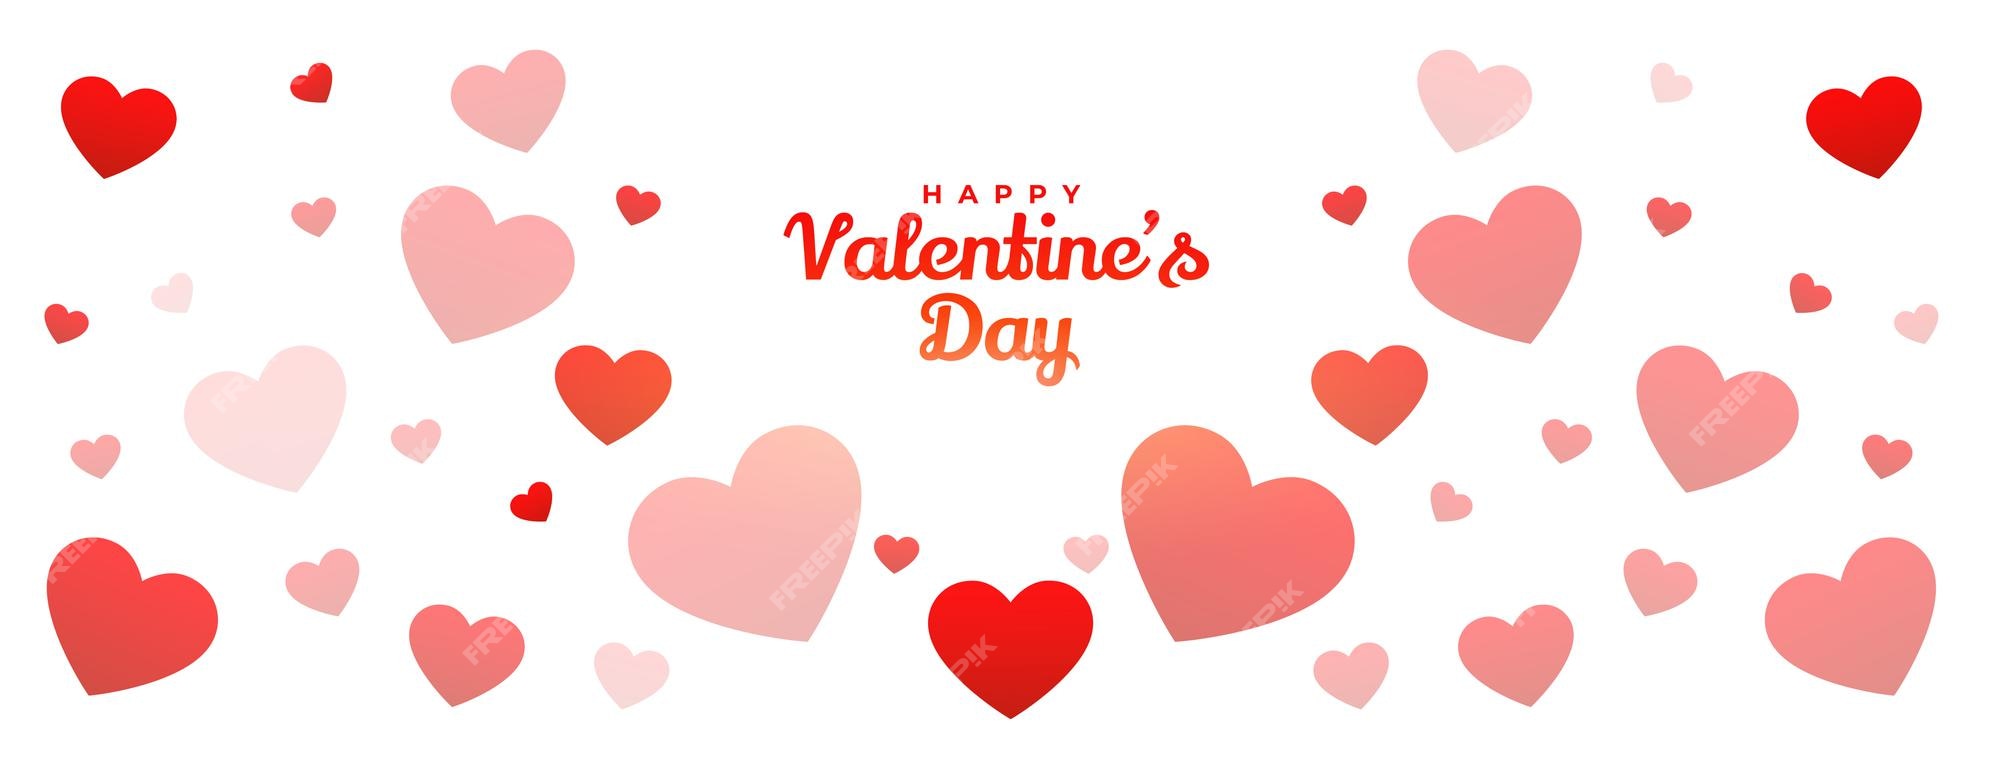 Free Vector | Happy valentines day hearts pattern banner design